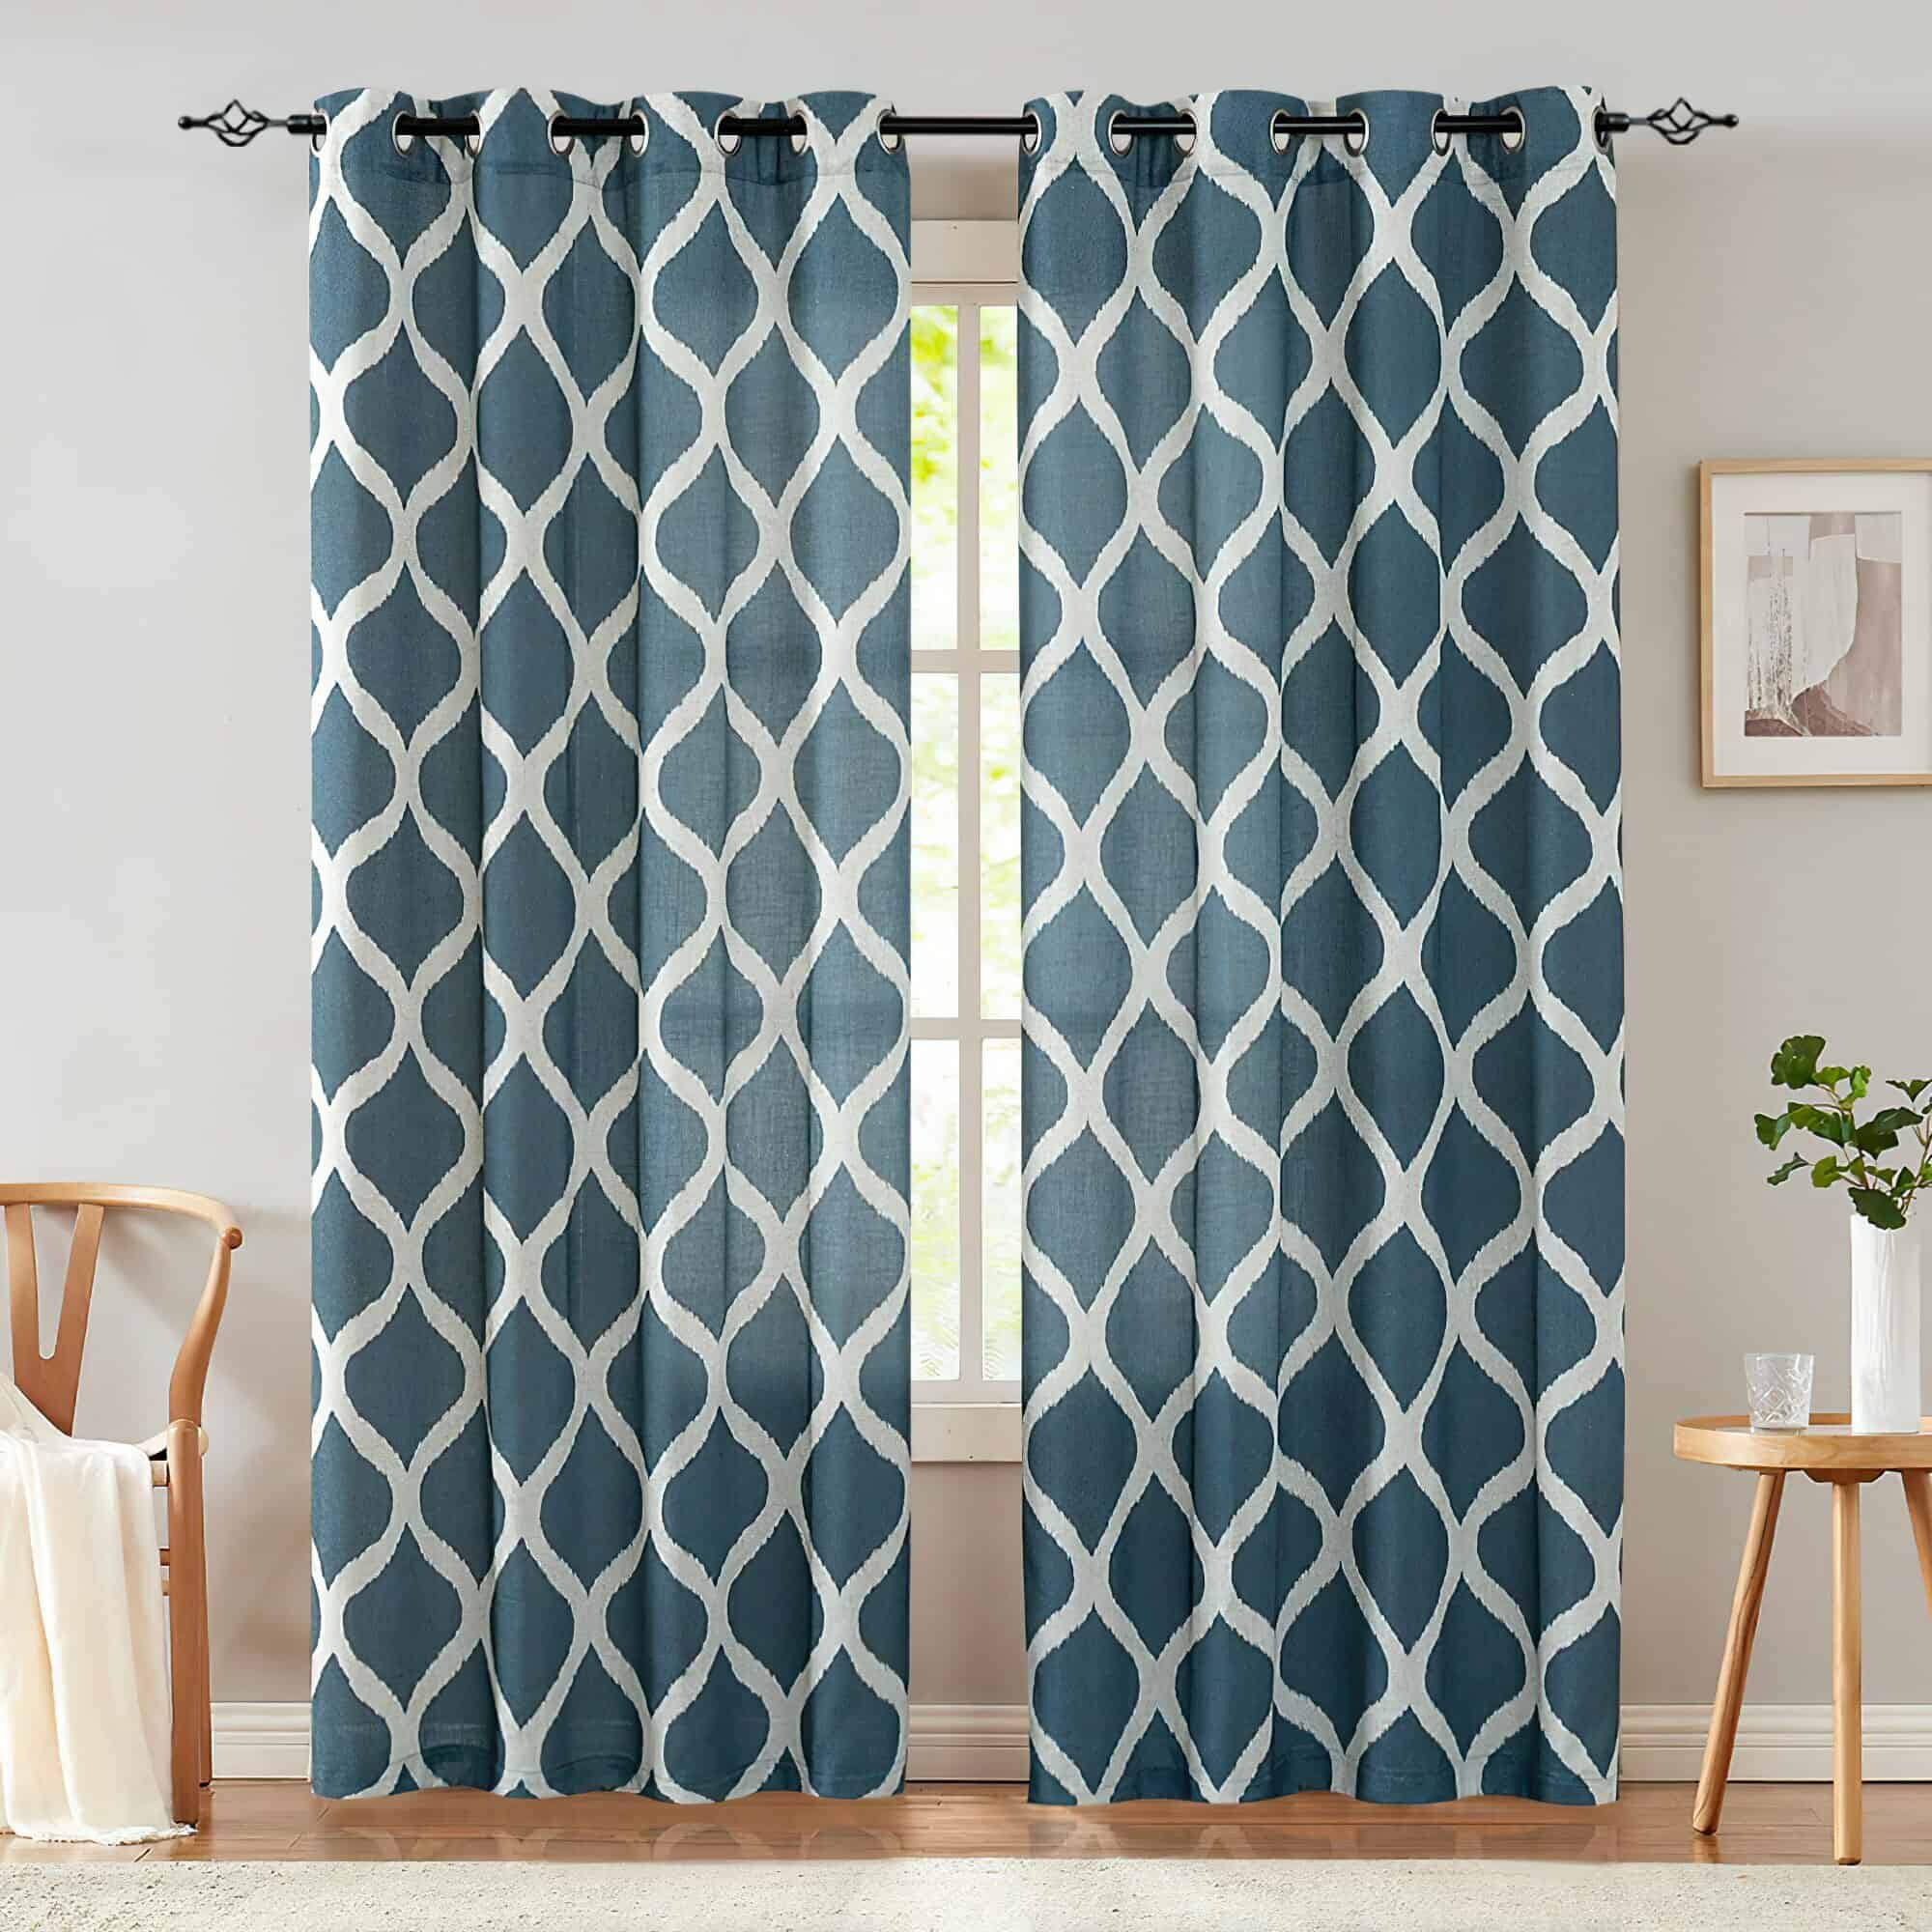 Ogee Printed Curtains Are Never A Miss